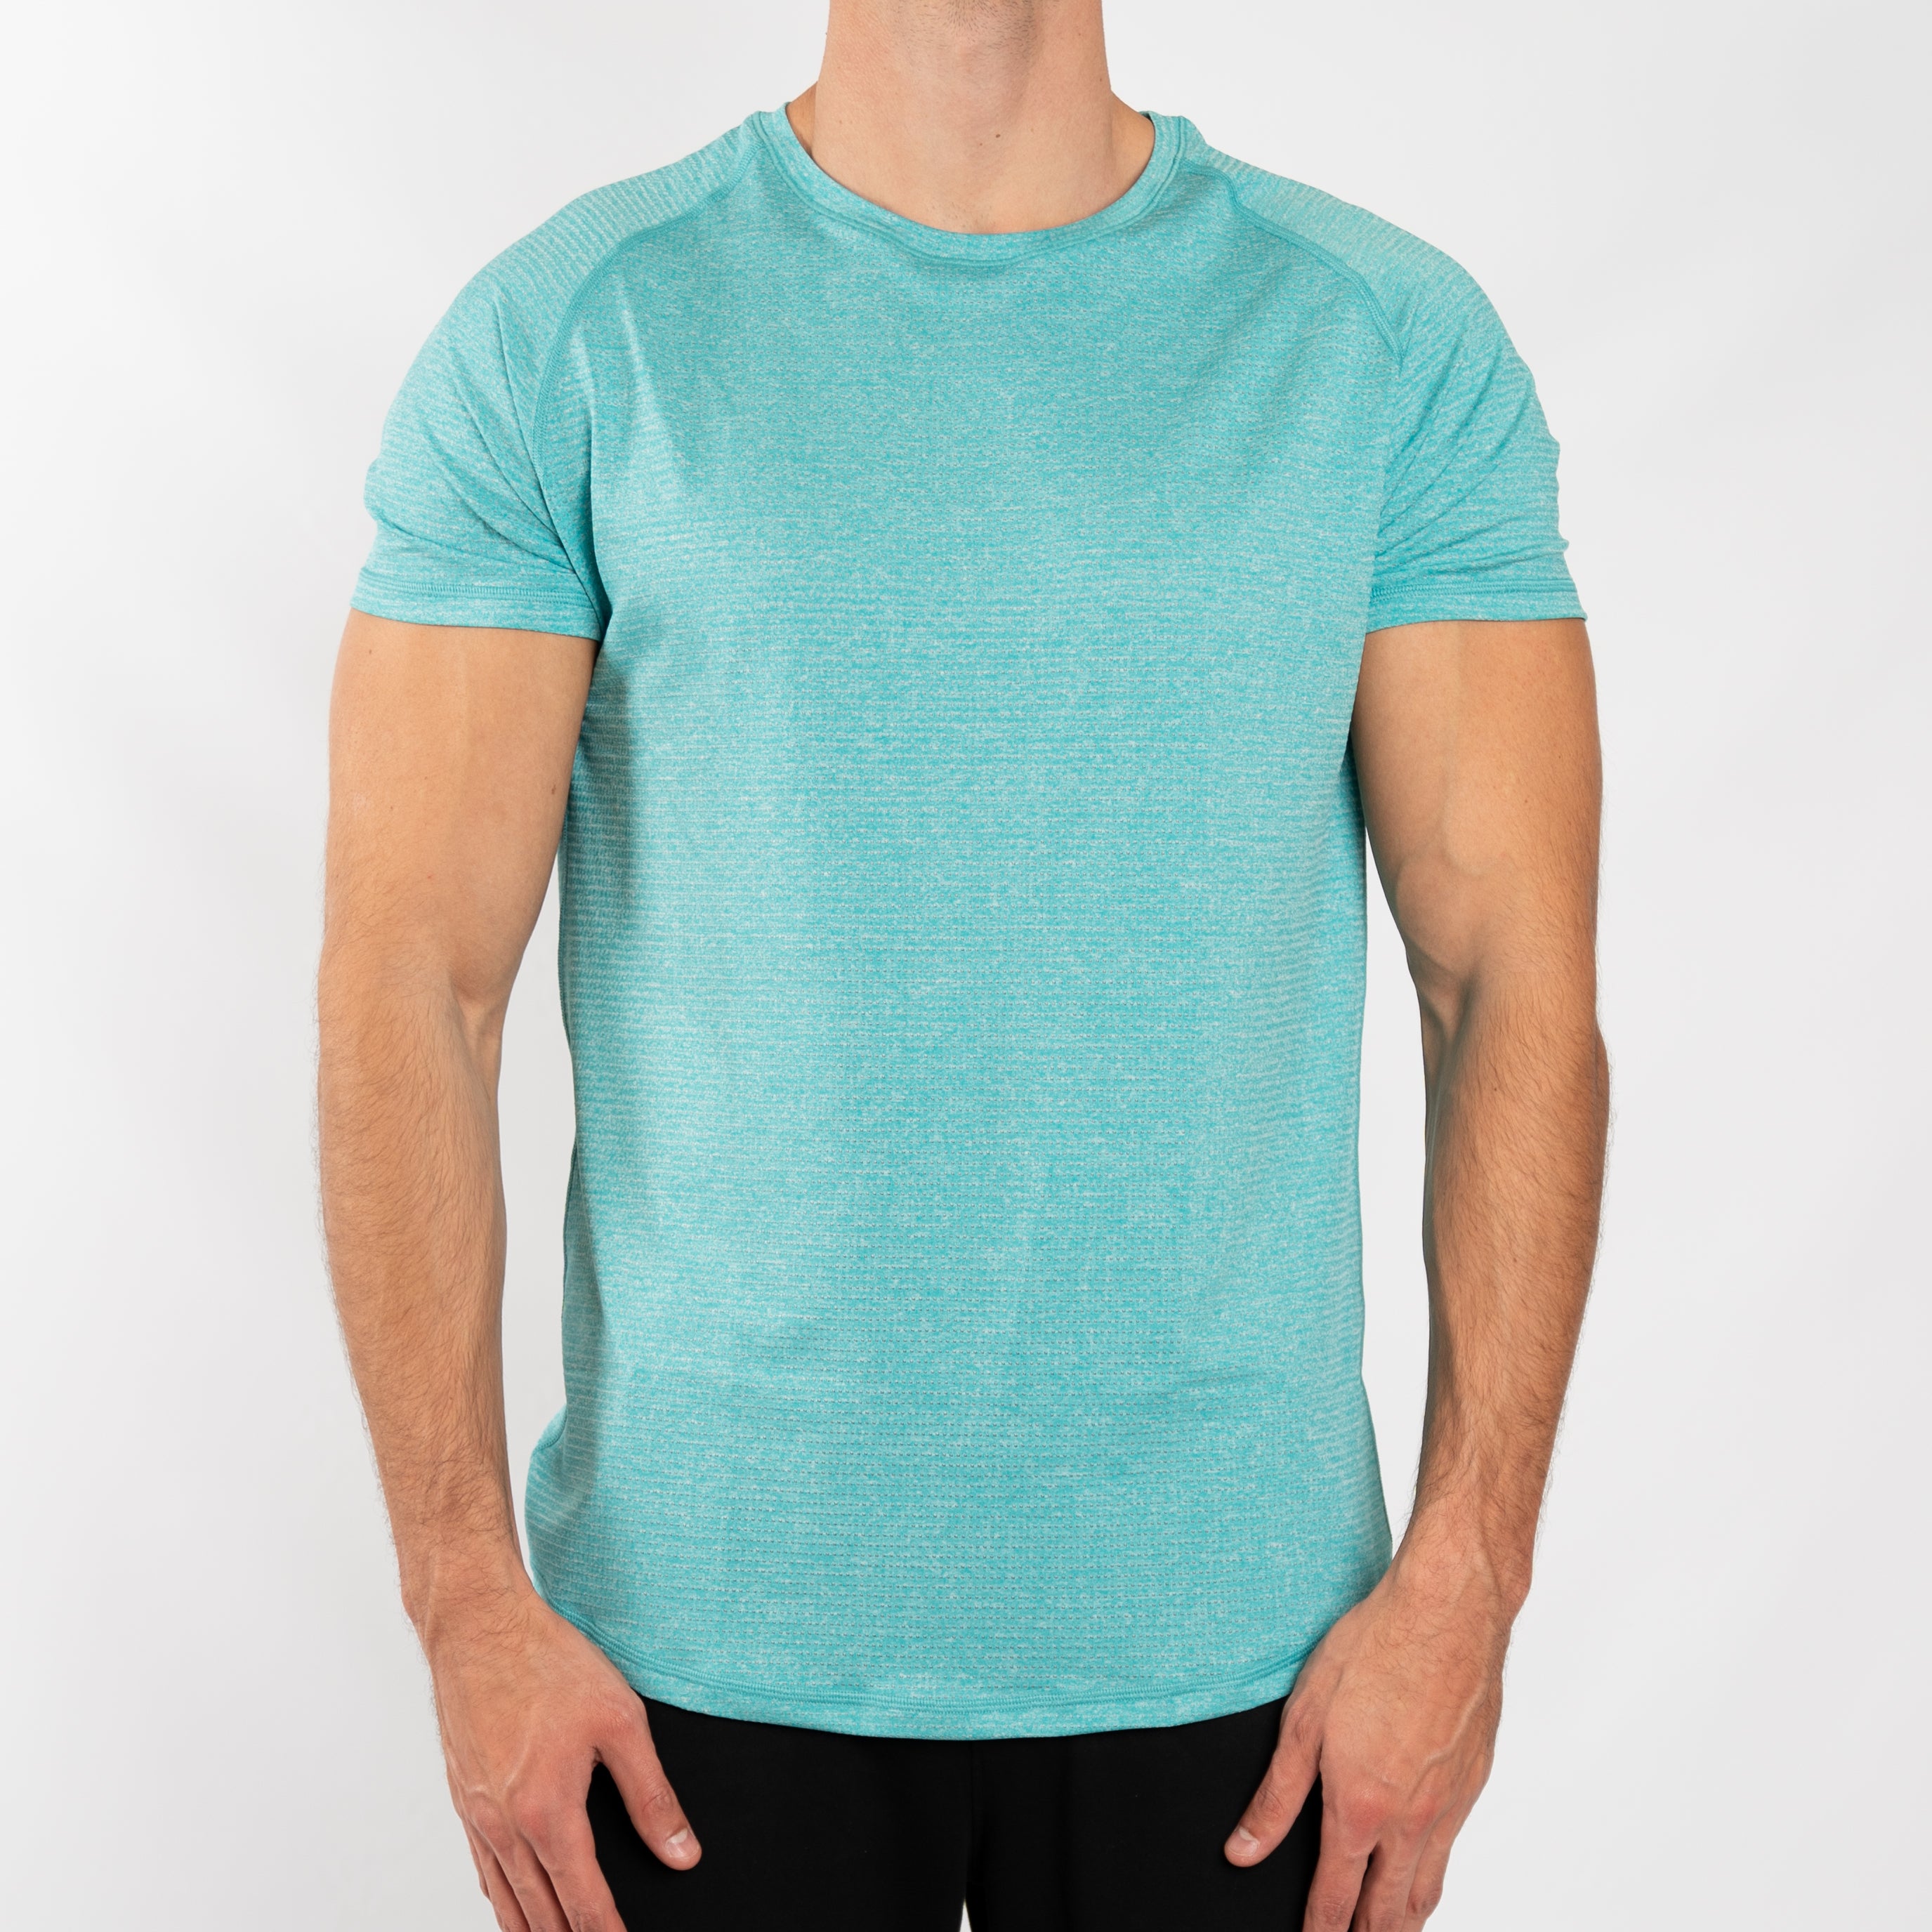 Men's Performance Tee in Baltic - Southern Athletica